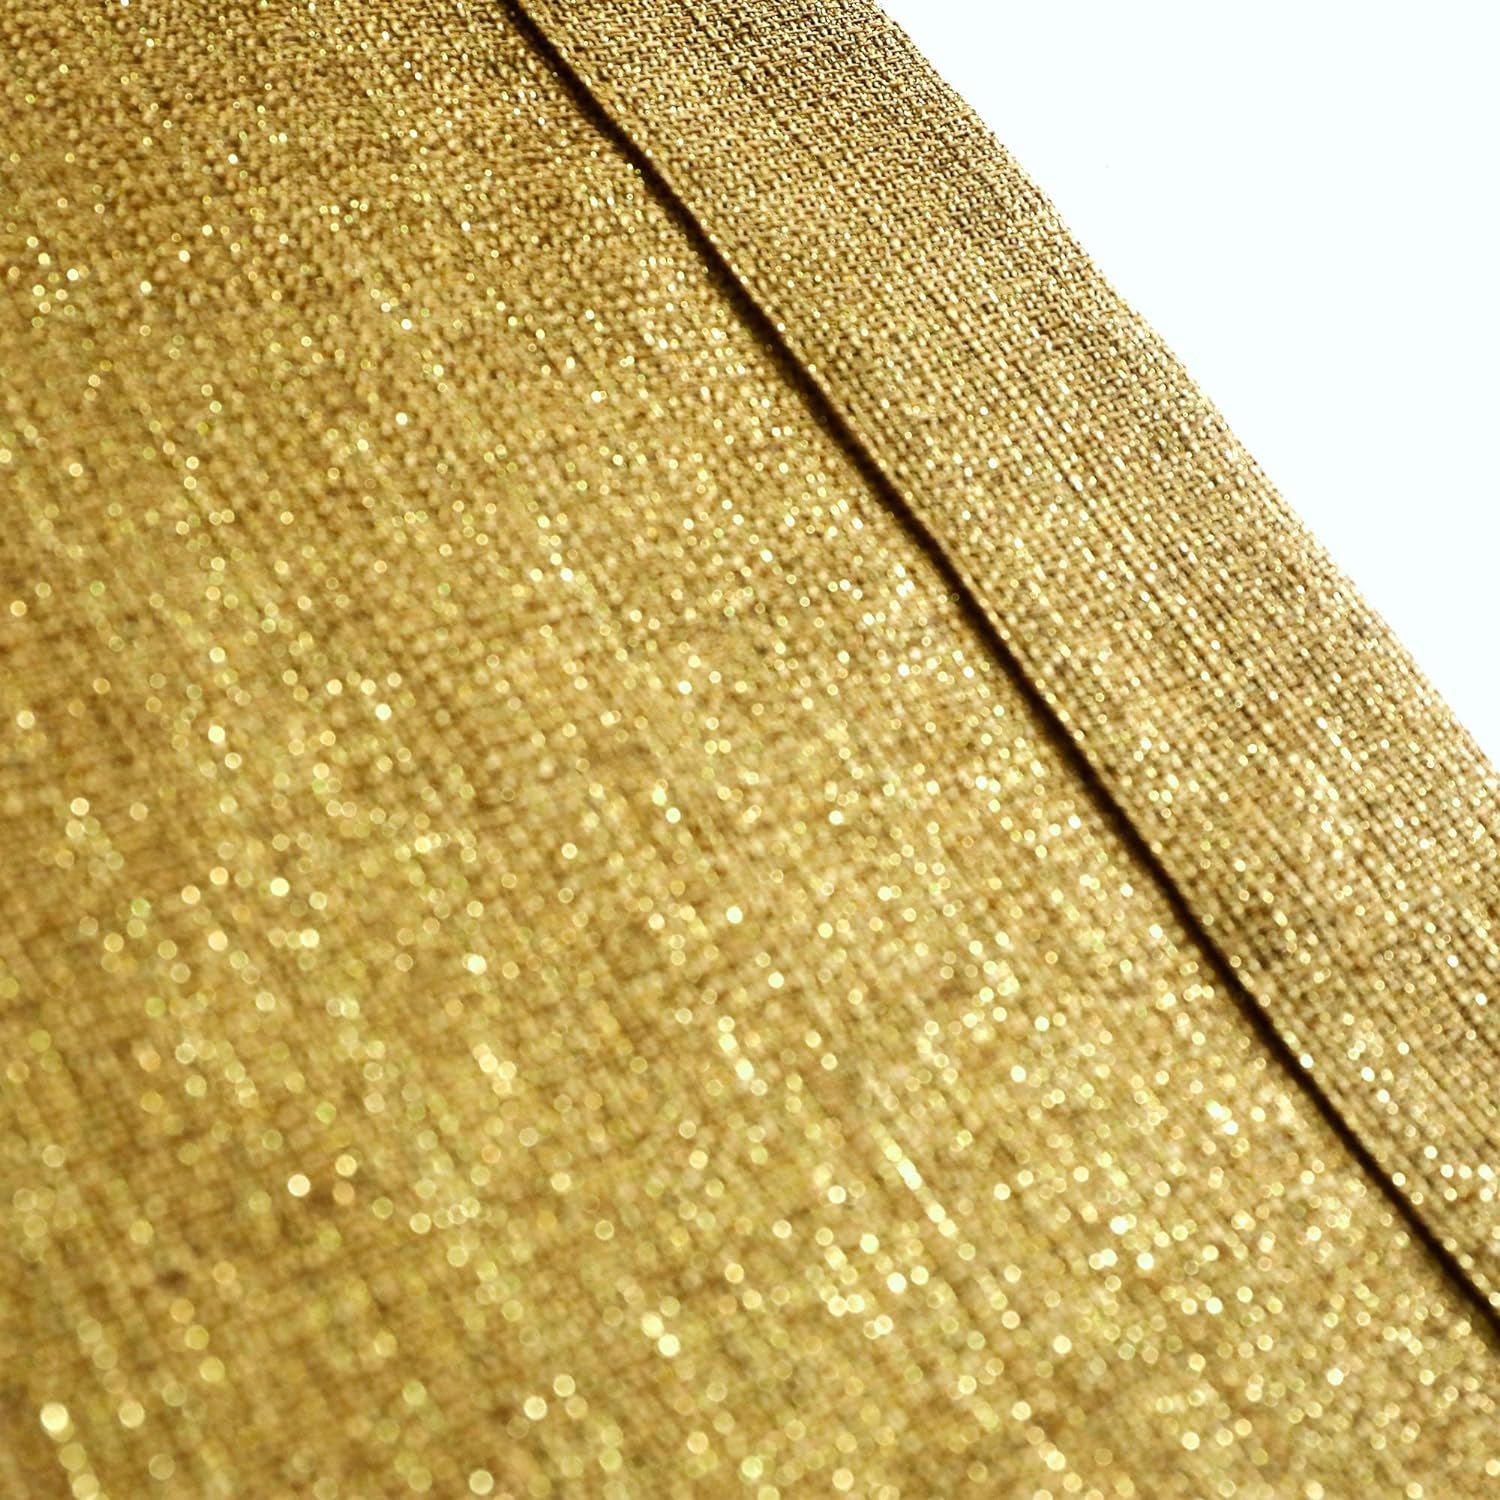 Gold Curtains 84 Inch Length for Living Room 2 Panels Set Rod Pocket Window Decor Semi Sheer Luxury Sparkle Shimmer Shiny Glitter Brown Golden Mustard Curtains for Bedroom 52X84 Long Christmas Decor  MRS.NATURALL TEXTILE   